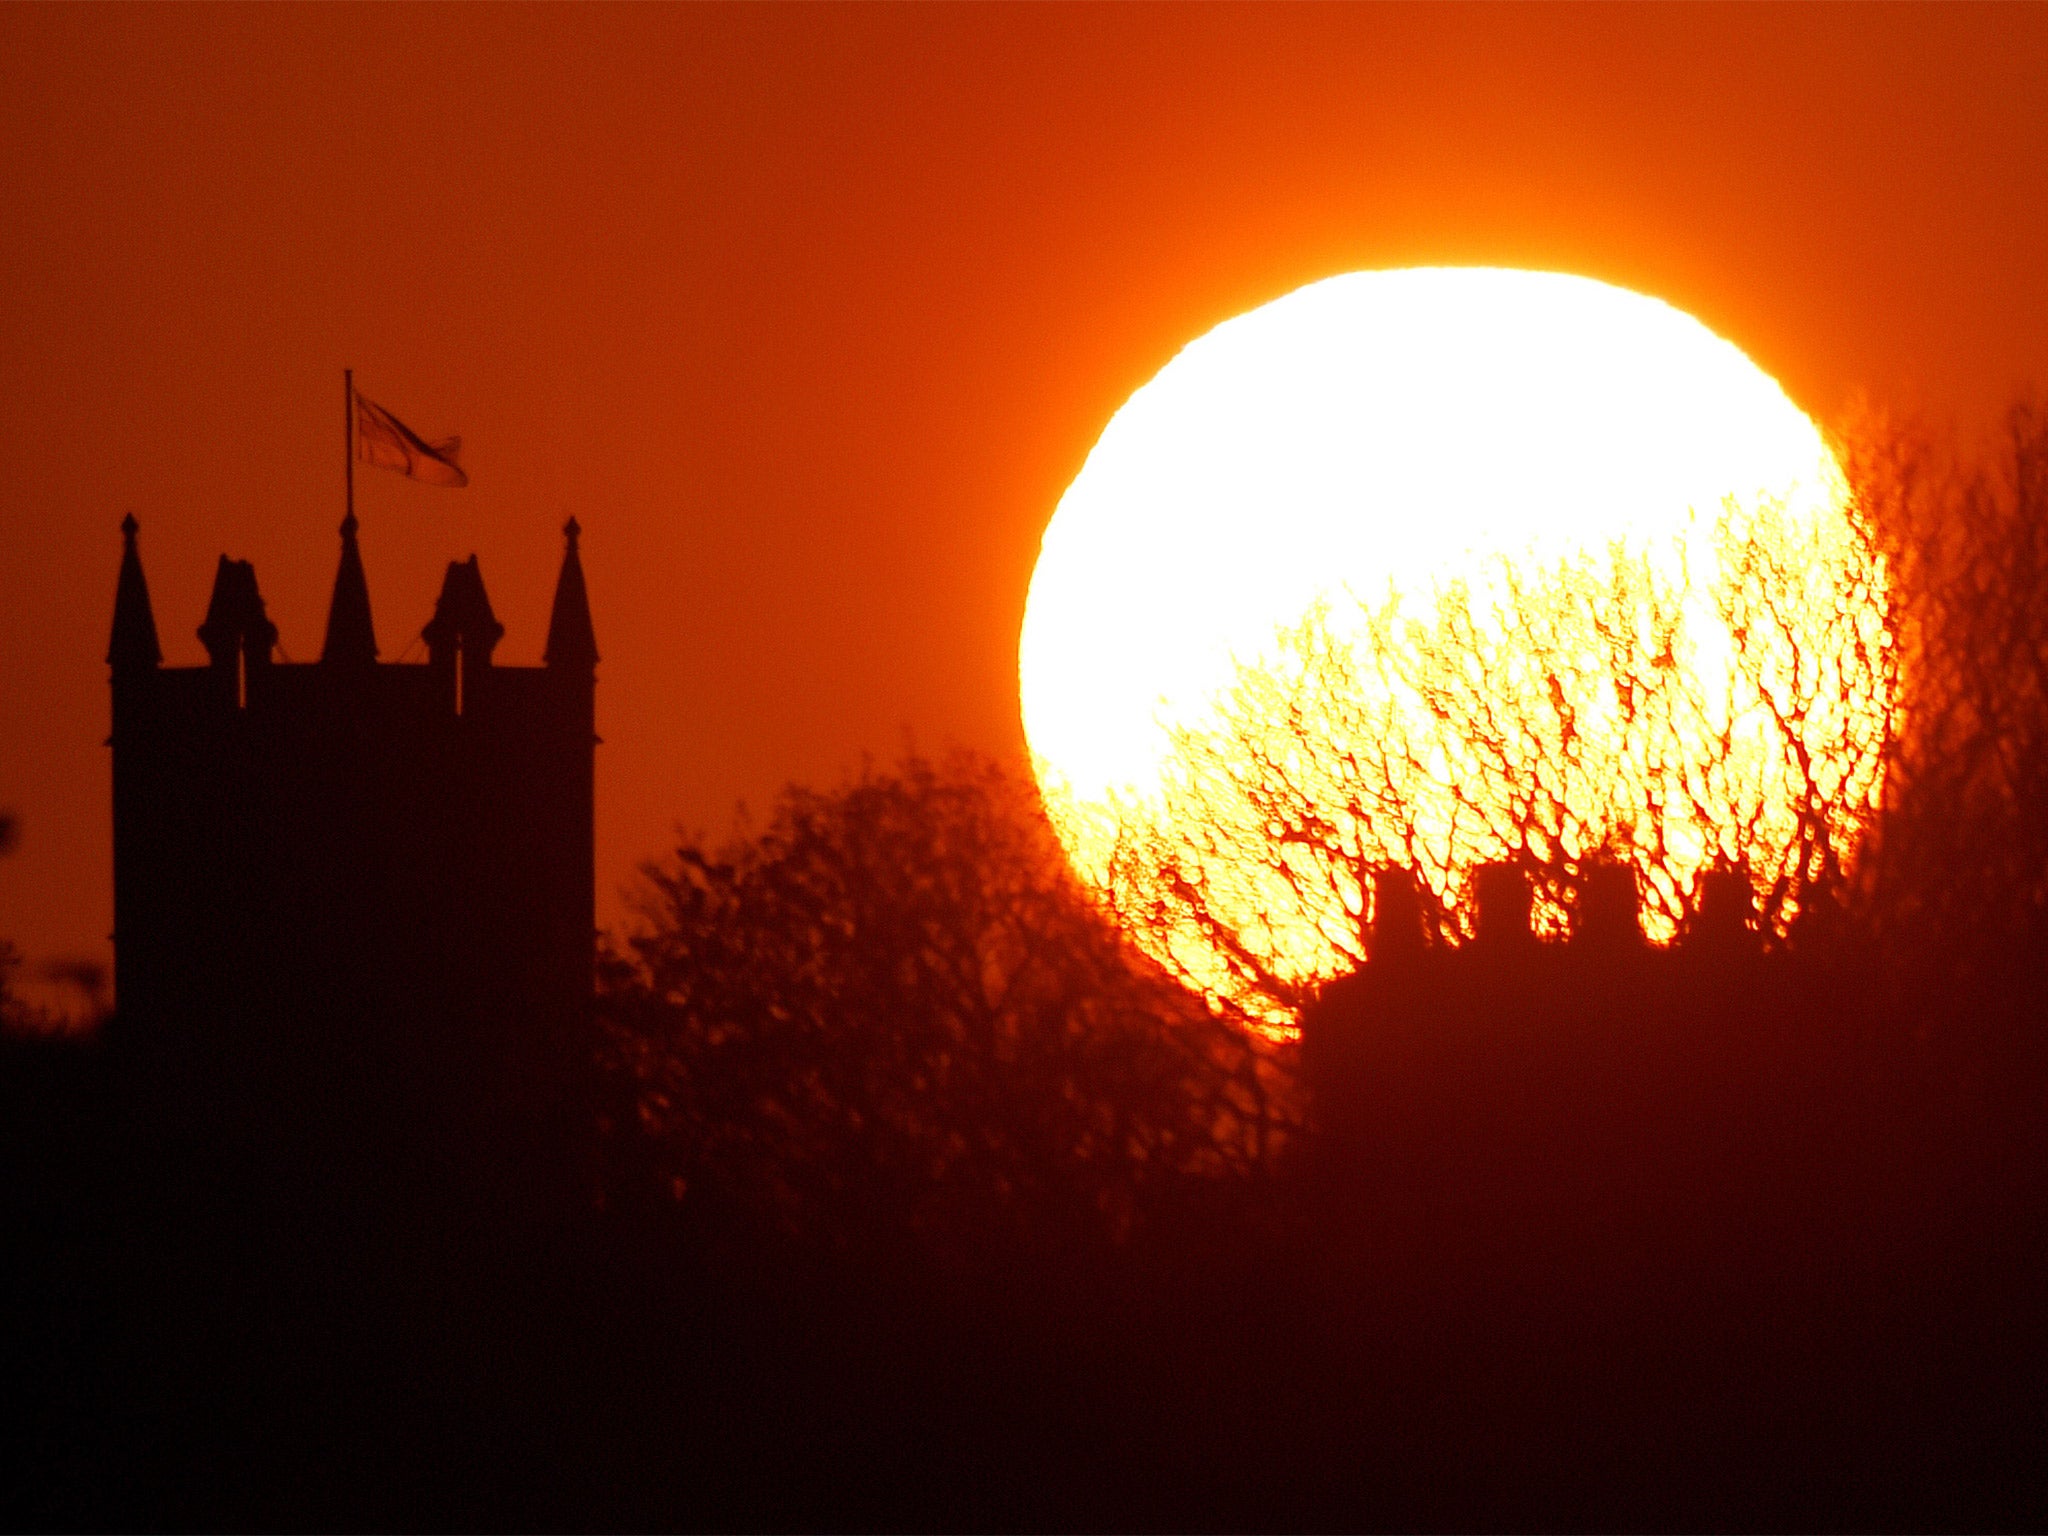 The sun balances next to St Albans Church in Earsdon, North Tyneside. Temperatures in Briatin this week equalled the Mediterranean island of Ibiza